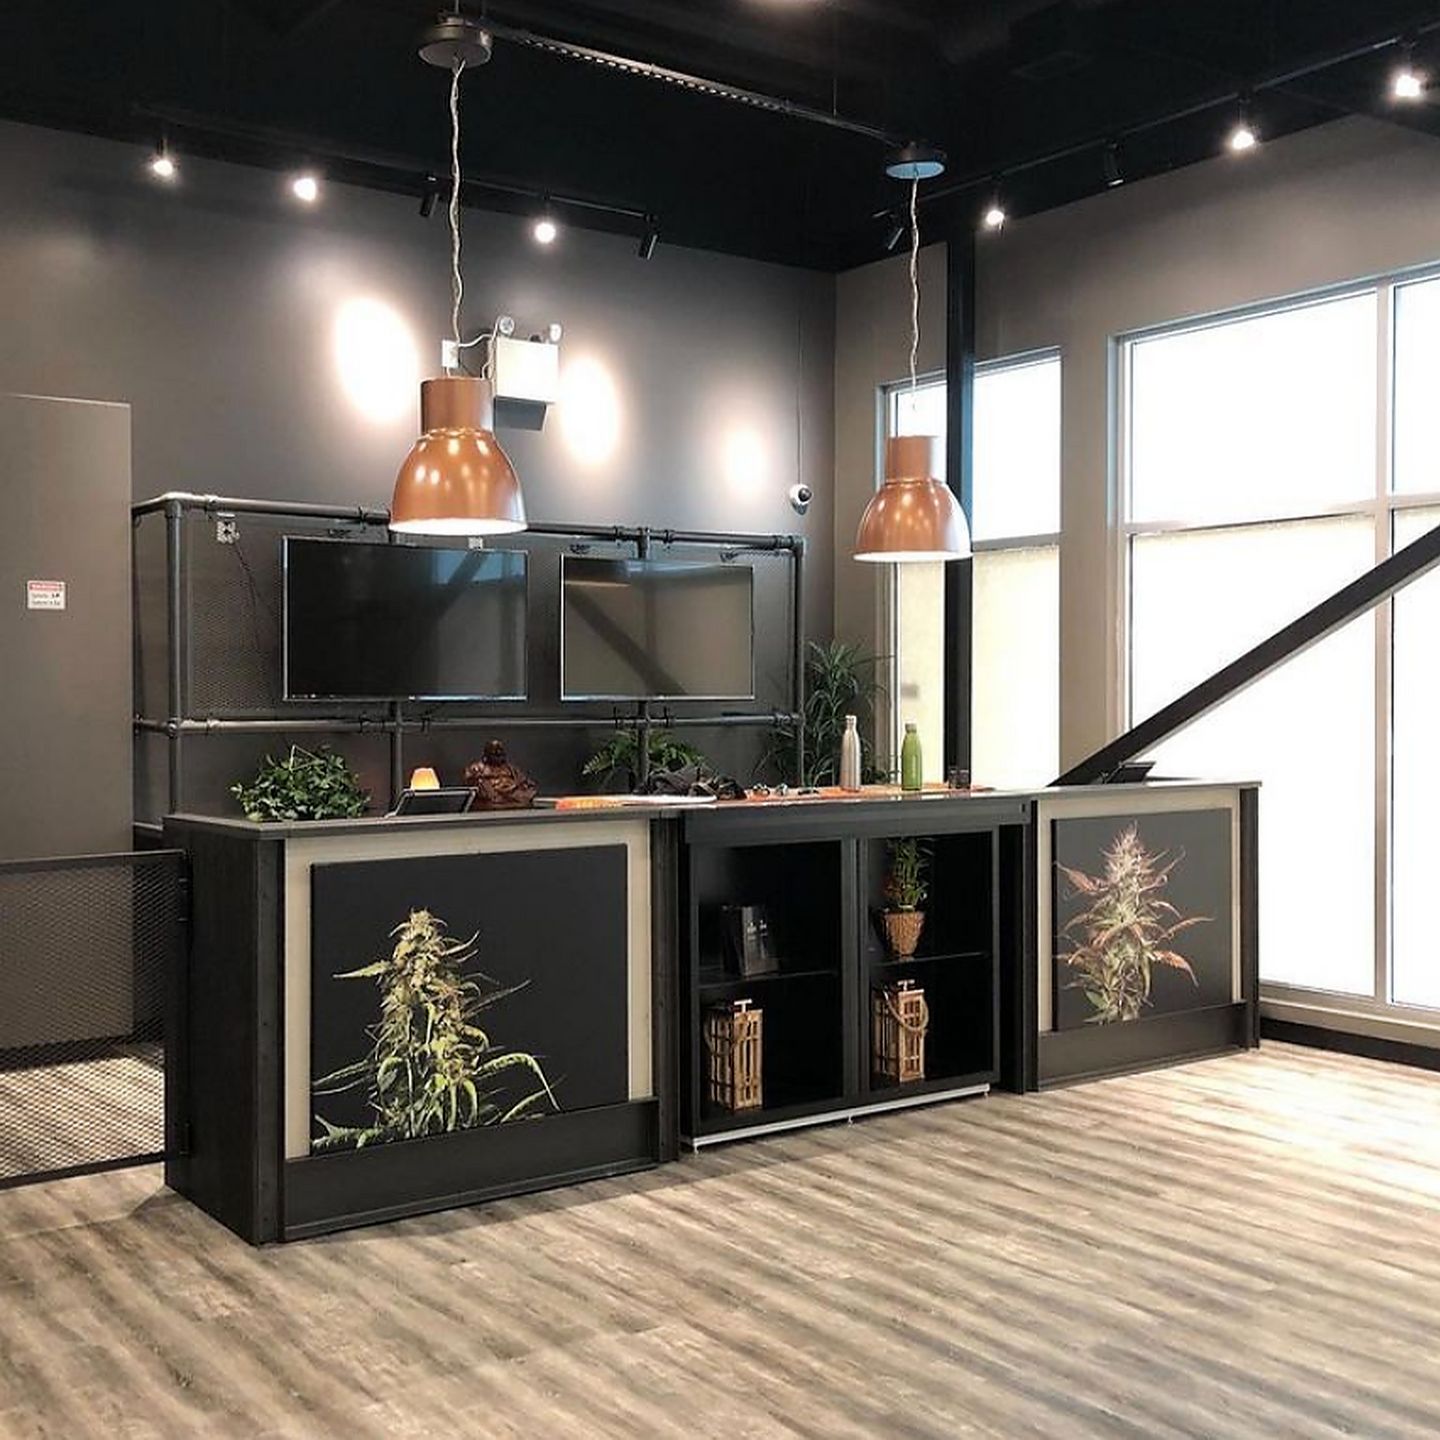 image feature Star Buds Cannabis Co. - Portage Ave, Winnipeg